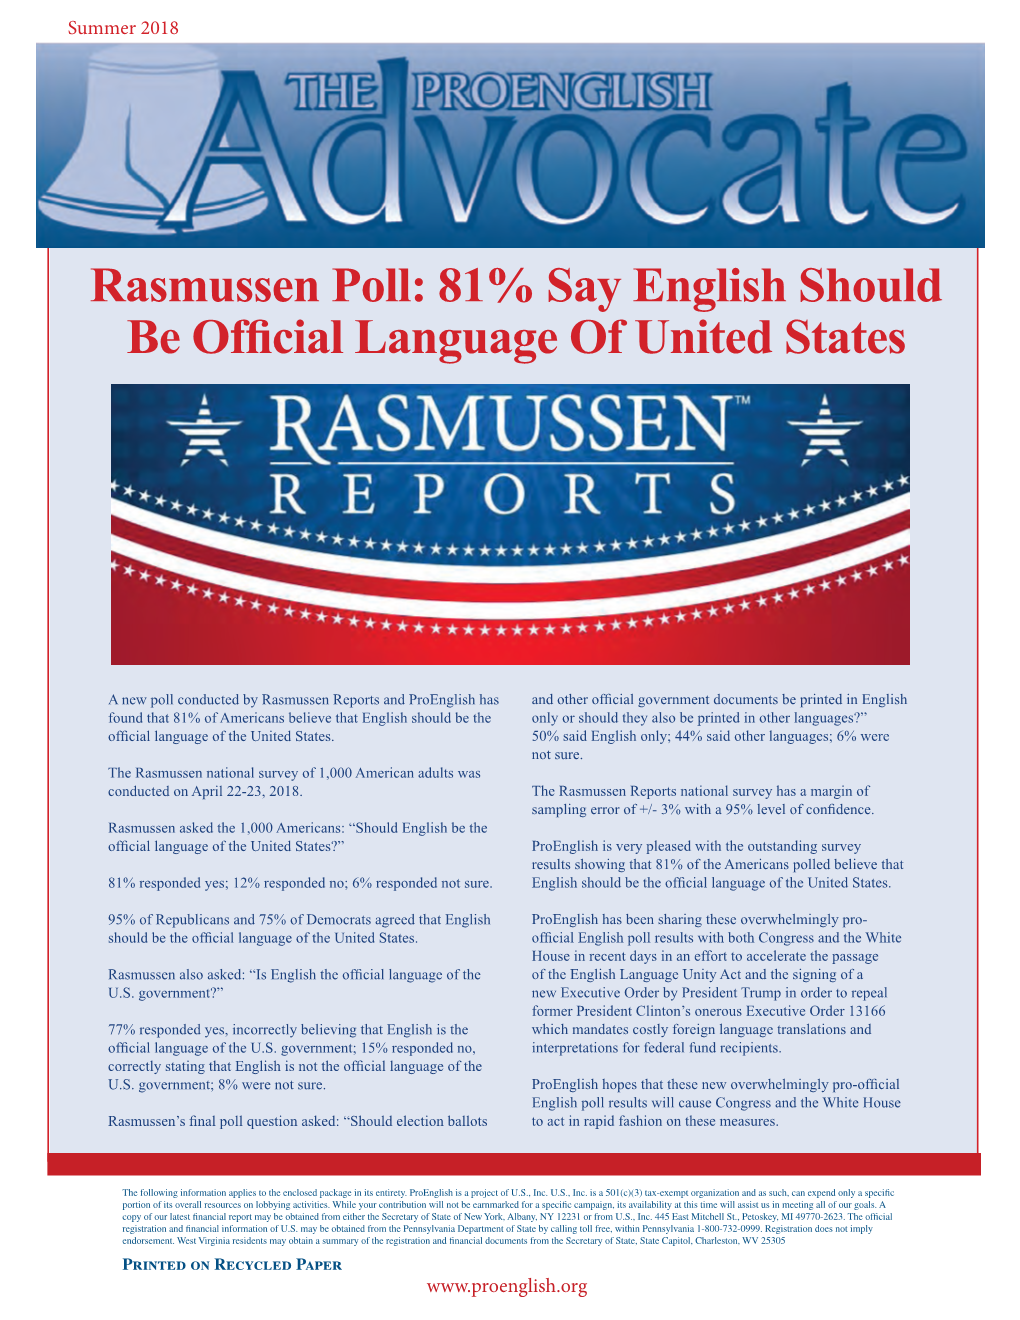 81% Say English Should Be Official Language of United States